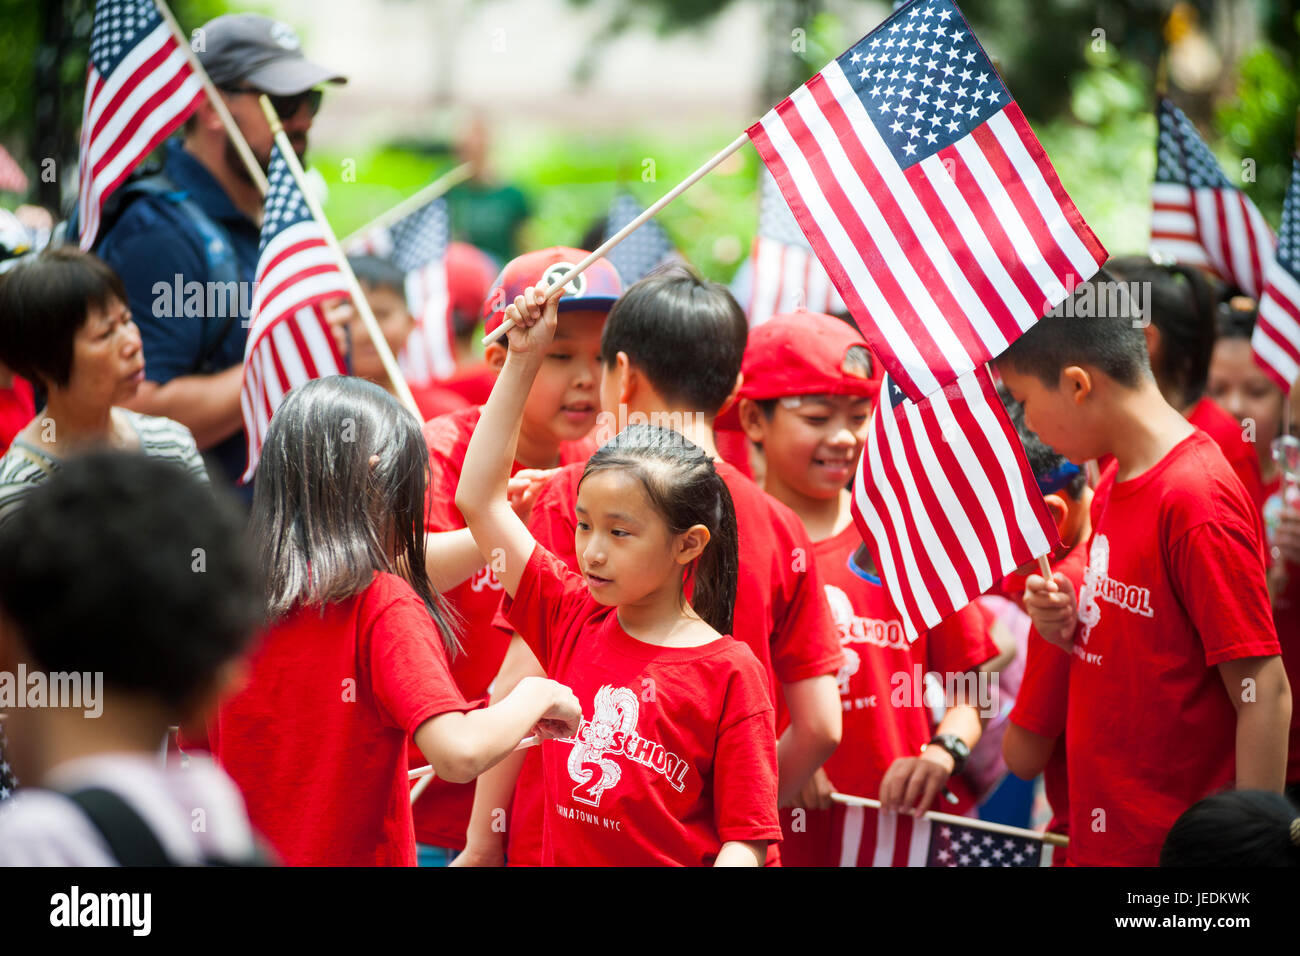 Students from PS 2 prepare to march in the annual Flag Day Parade in New York on Wednesday, June 14, 2017, starting at New York City Hall Park.  Flag Day was created by proclamation by President Woodrow Wilson on June 14, 1916 as a holiday honoring America's flag but it was not until 1949 when it became National Flag Day.  The holiday honors the 1777 Flag Resolution where the stars and stripes were officially adopted as the flag of the United States. (© Richard B. Levine) Stock Photo